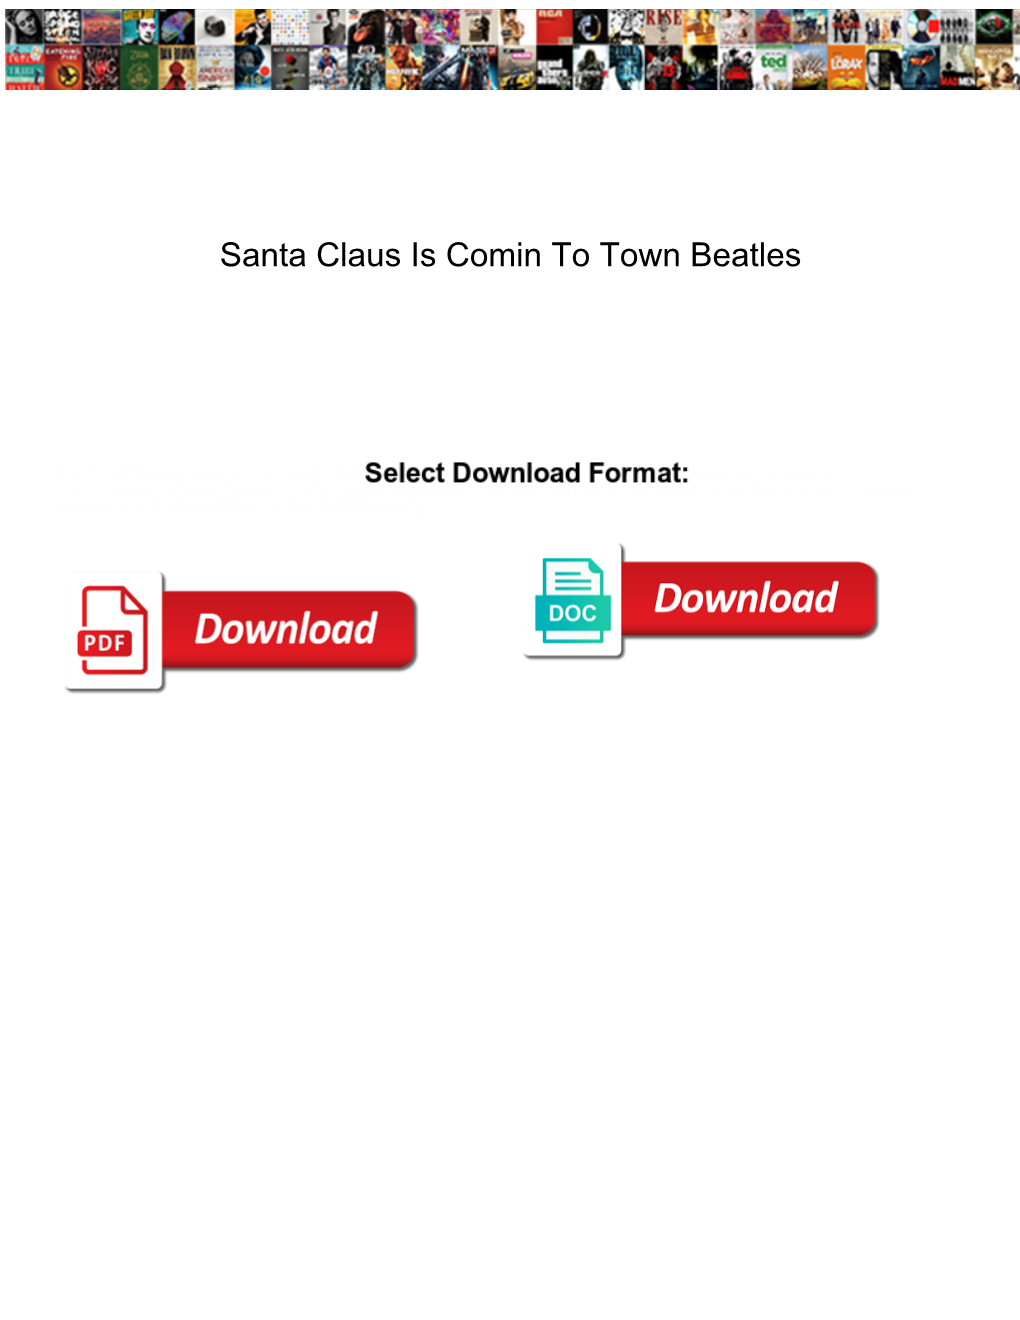 Santa Claus Is Comin to Town Beatles